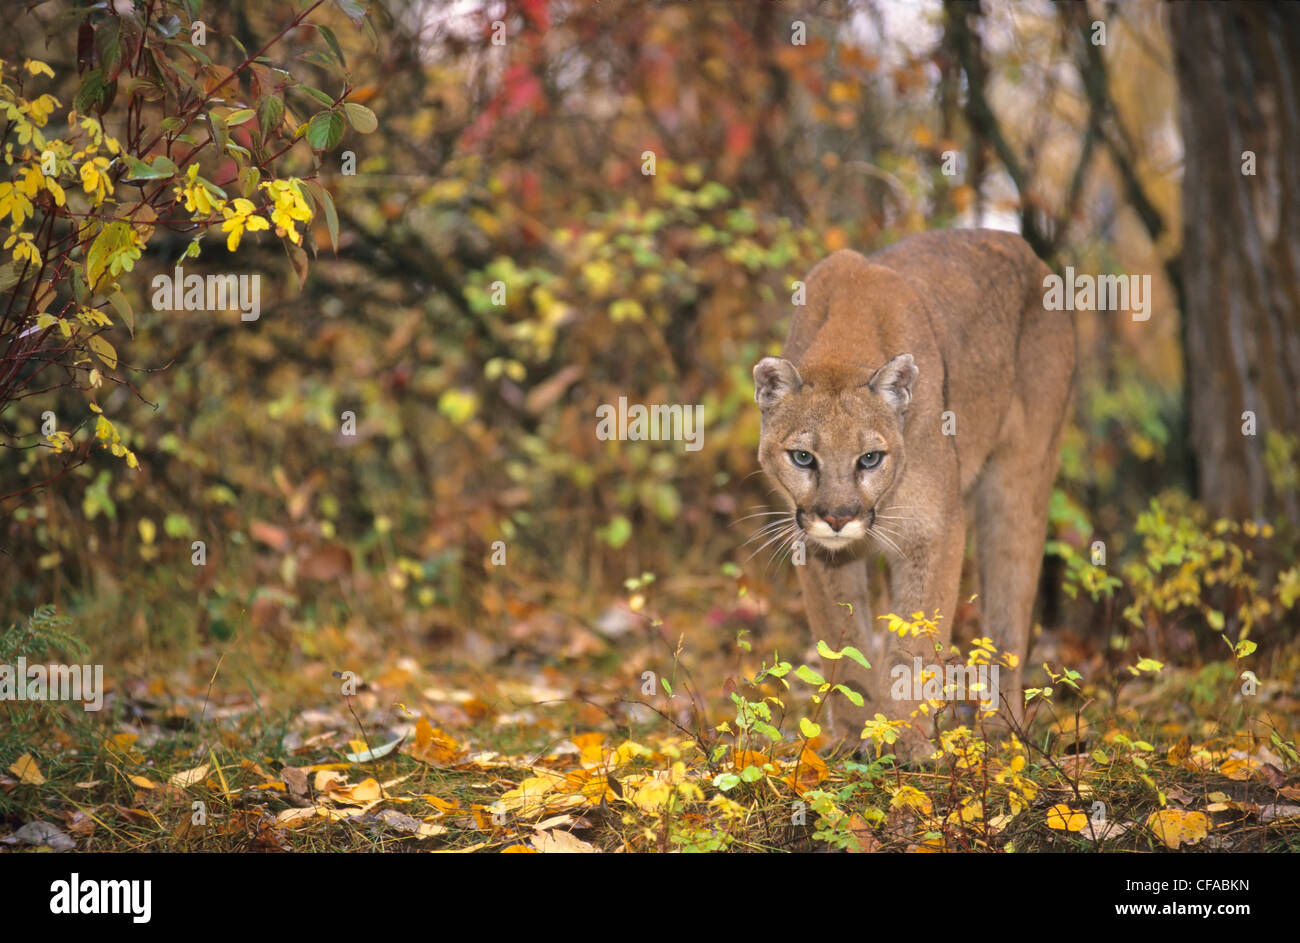 Adult cougar (Puma concolor) in autumn forest, Montana, USA. Stock Photo